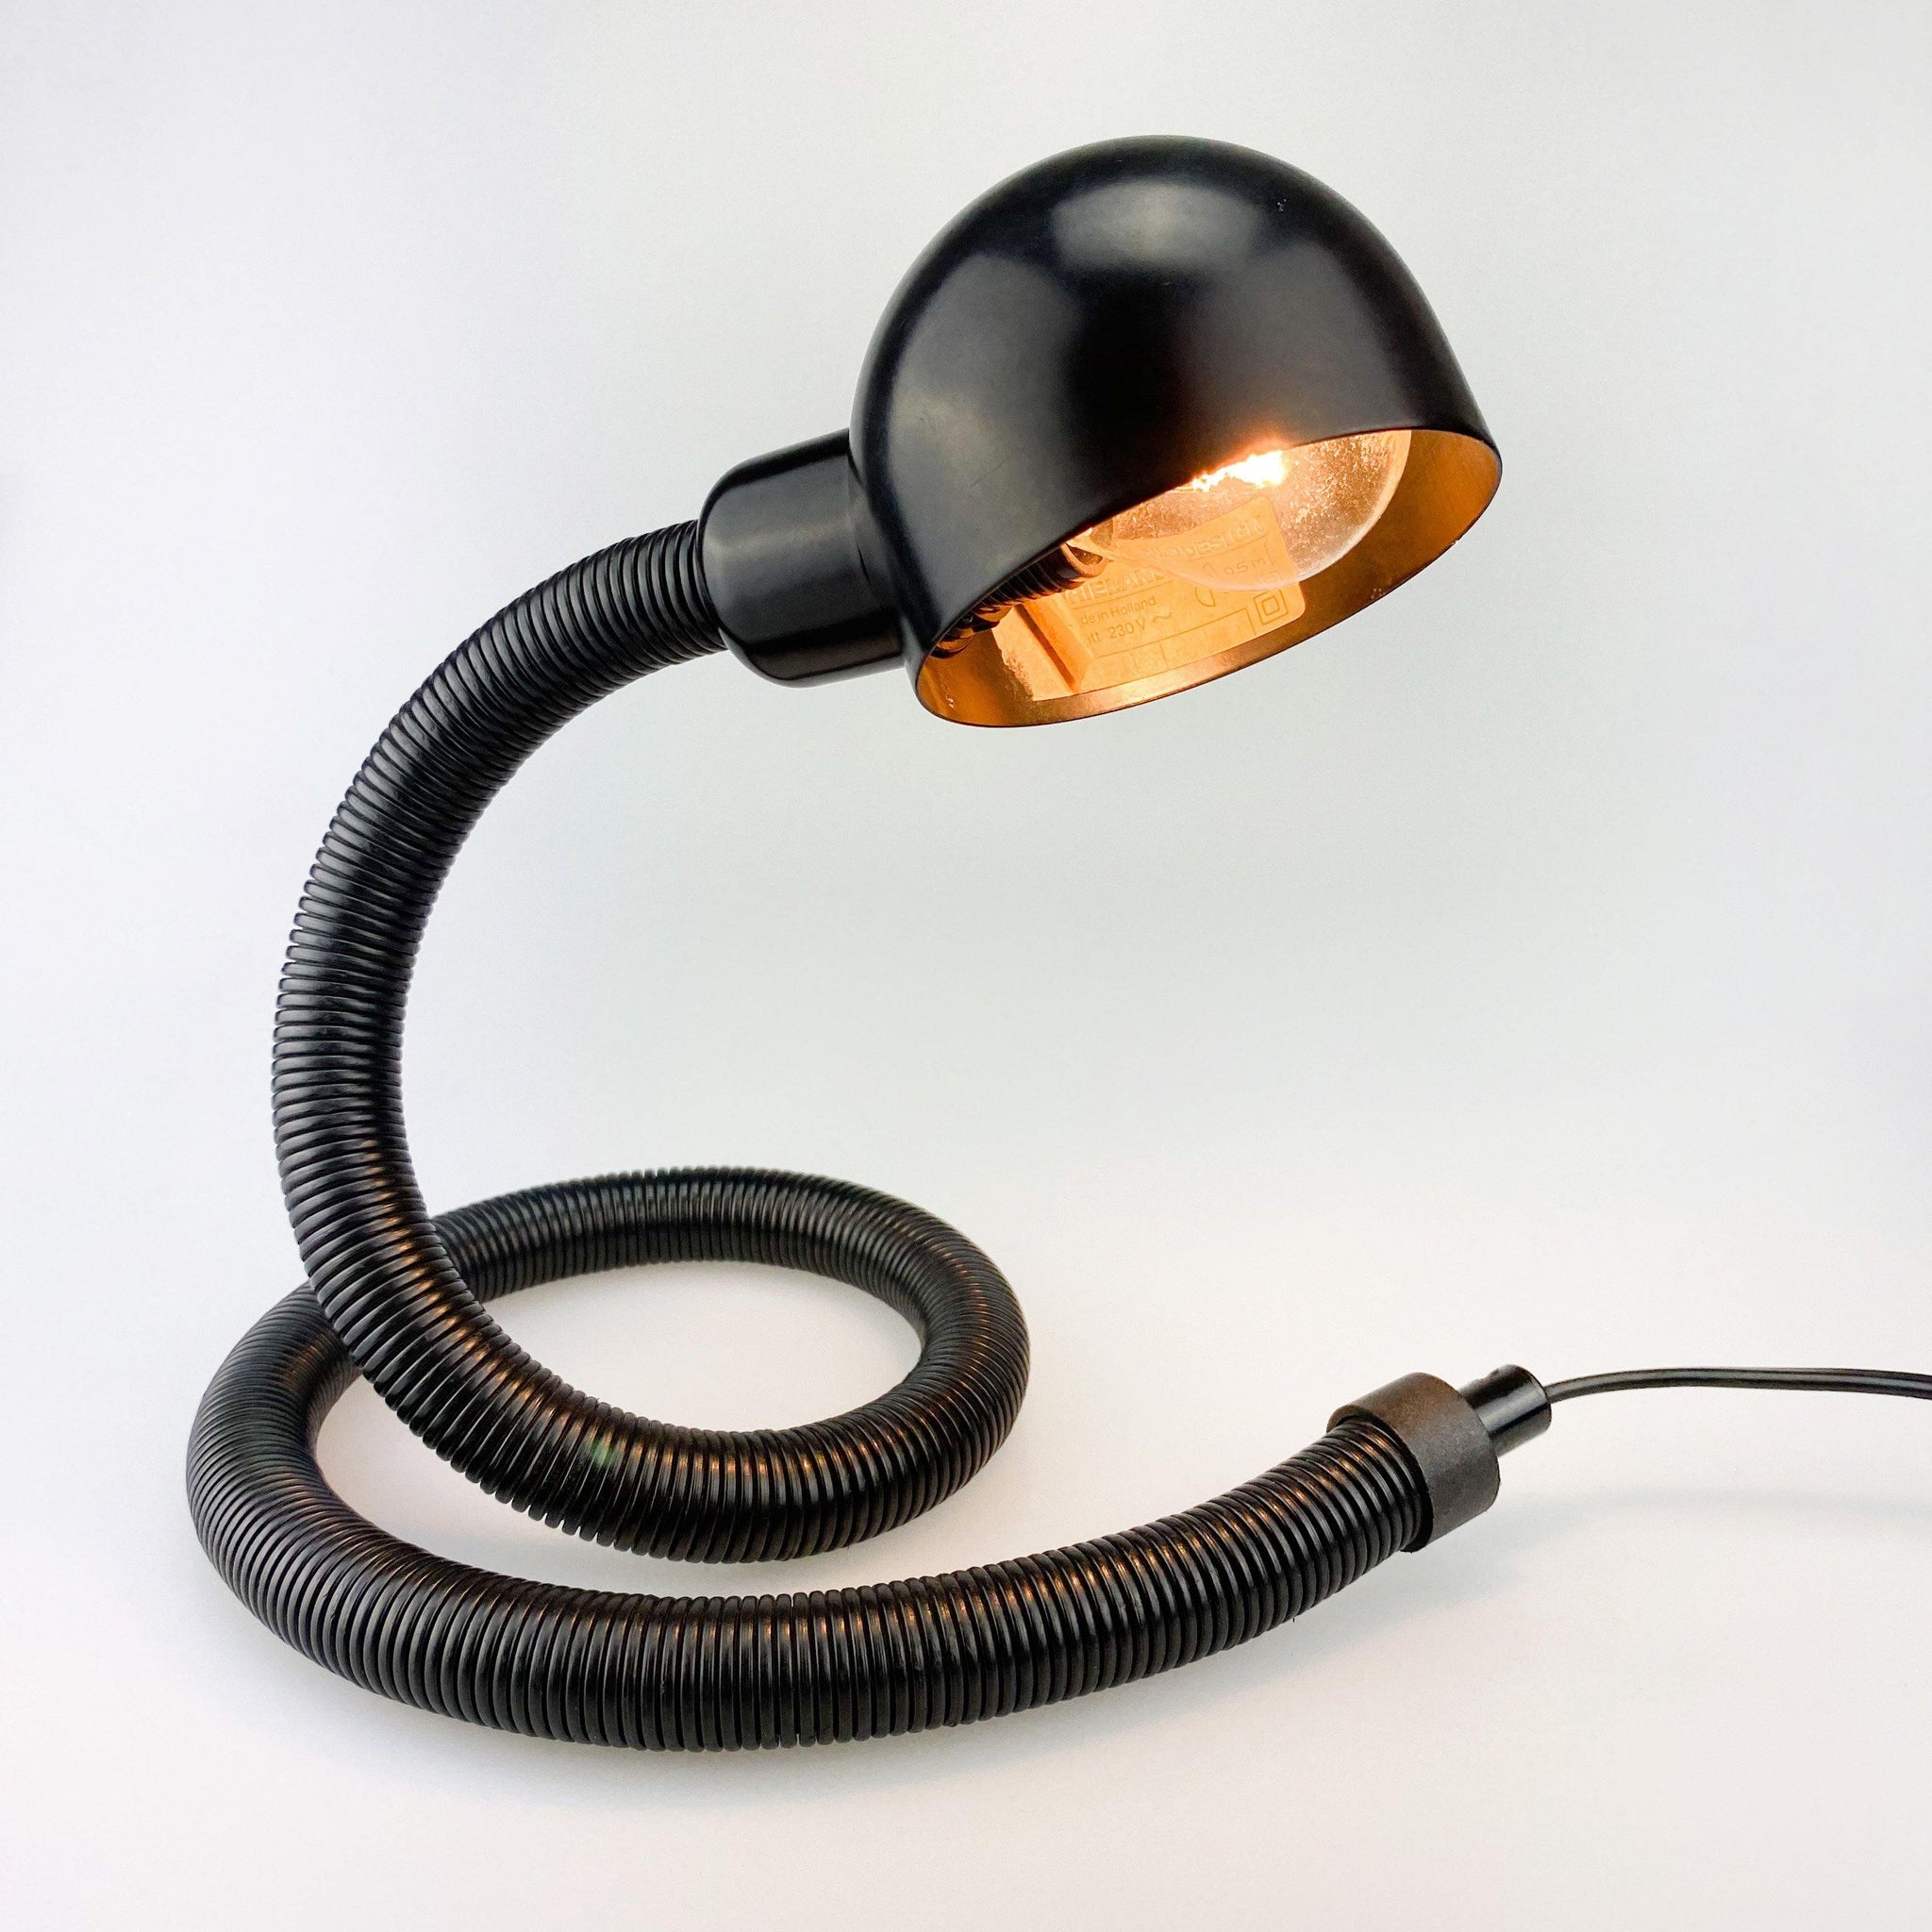 Hebi lamp by Vrieland Design in Holland, 1970s – falsotecho